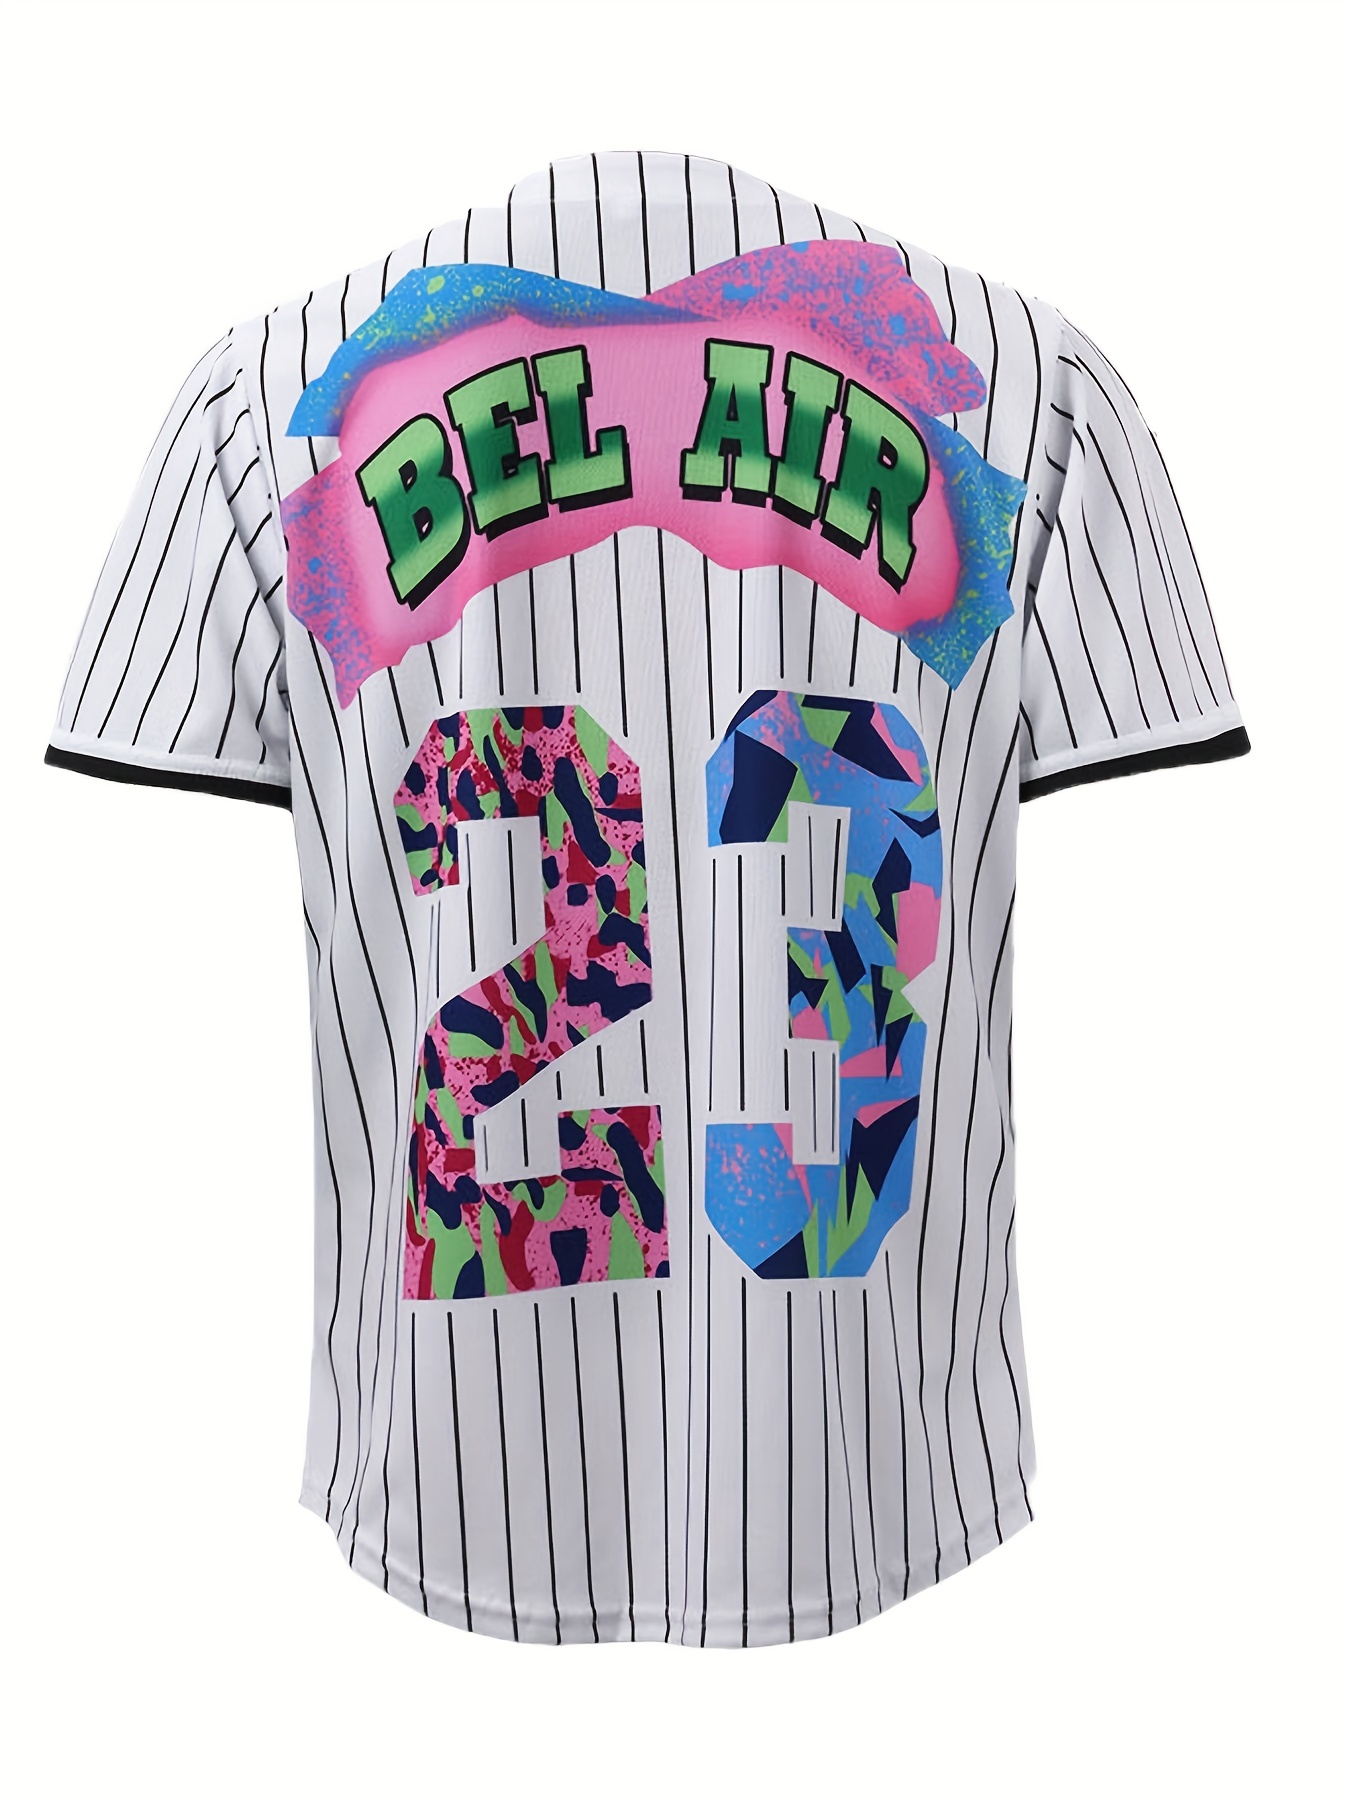 Men's Bel Air #23 Baseball Jersey, 90's City Theme Party Clothing